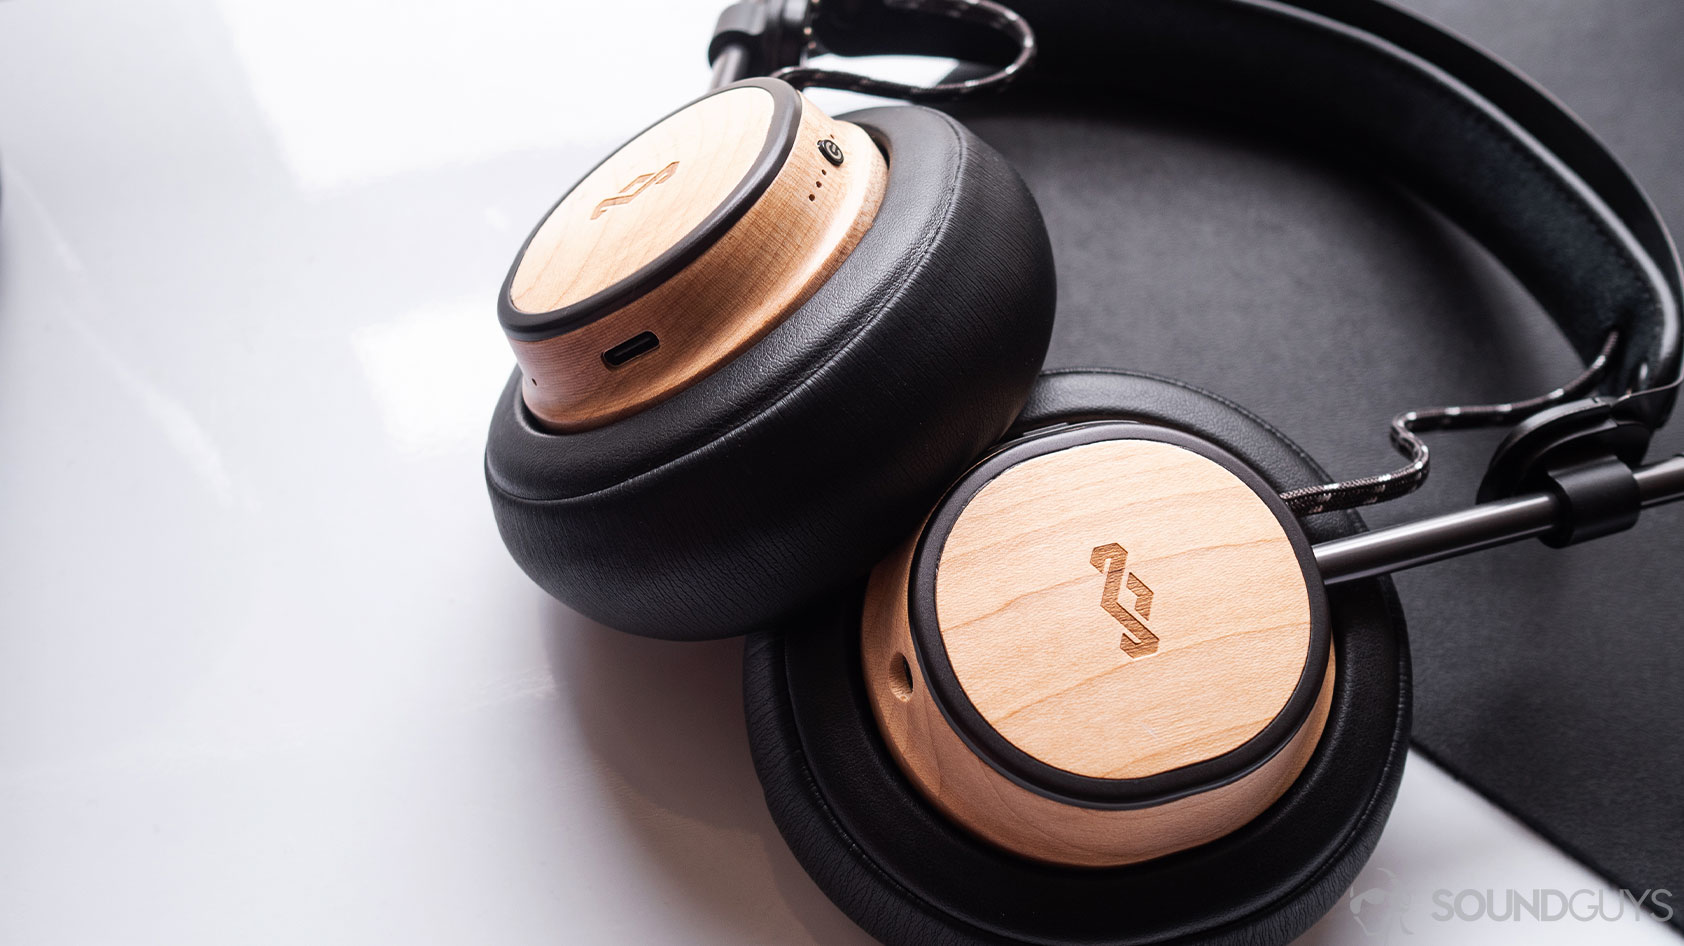 House Of Marley's PVF Headphones Have A Big And Bold Sound